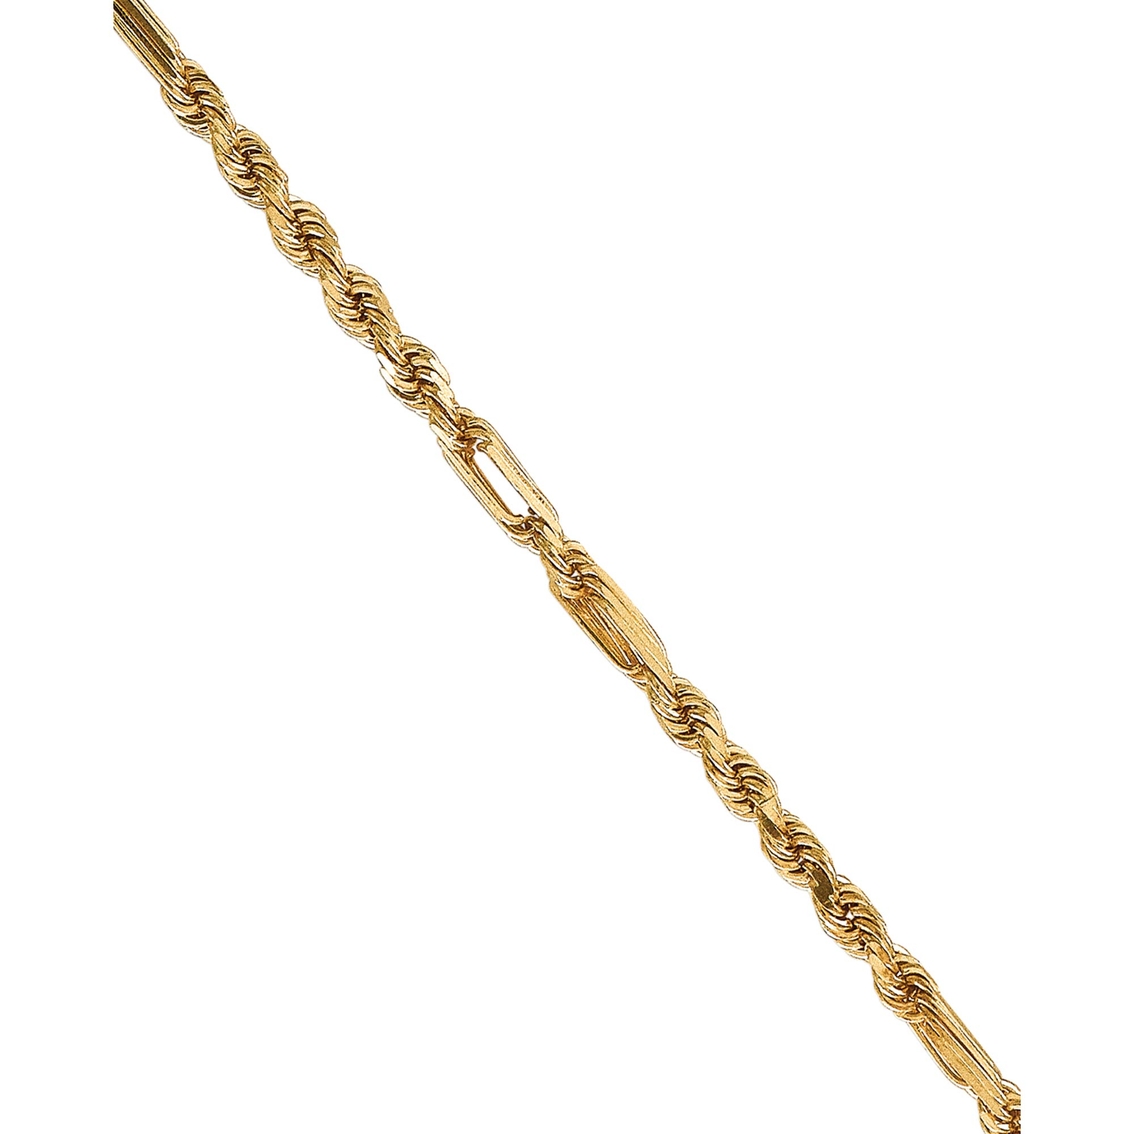 14K Gold Milano Rope Chain Necklace 22 in. - Image 2 of 3